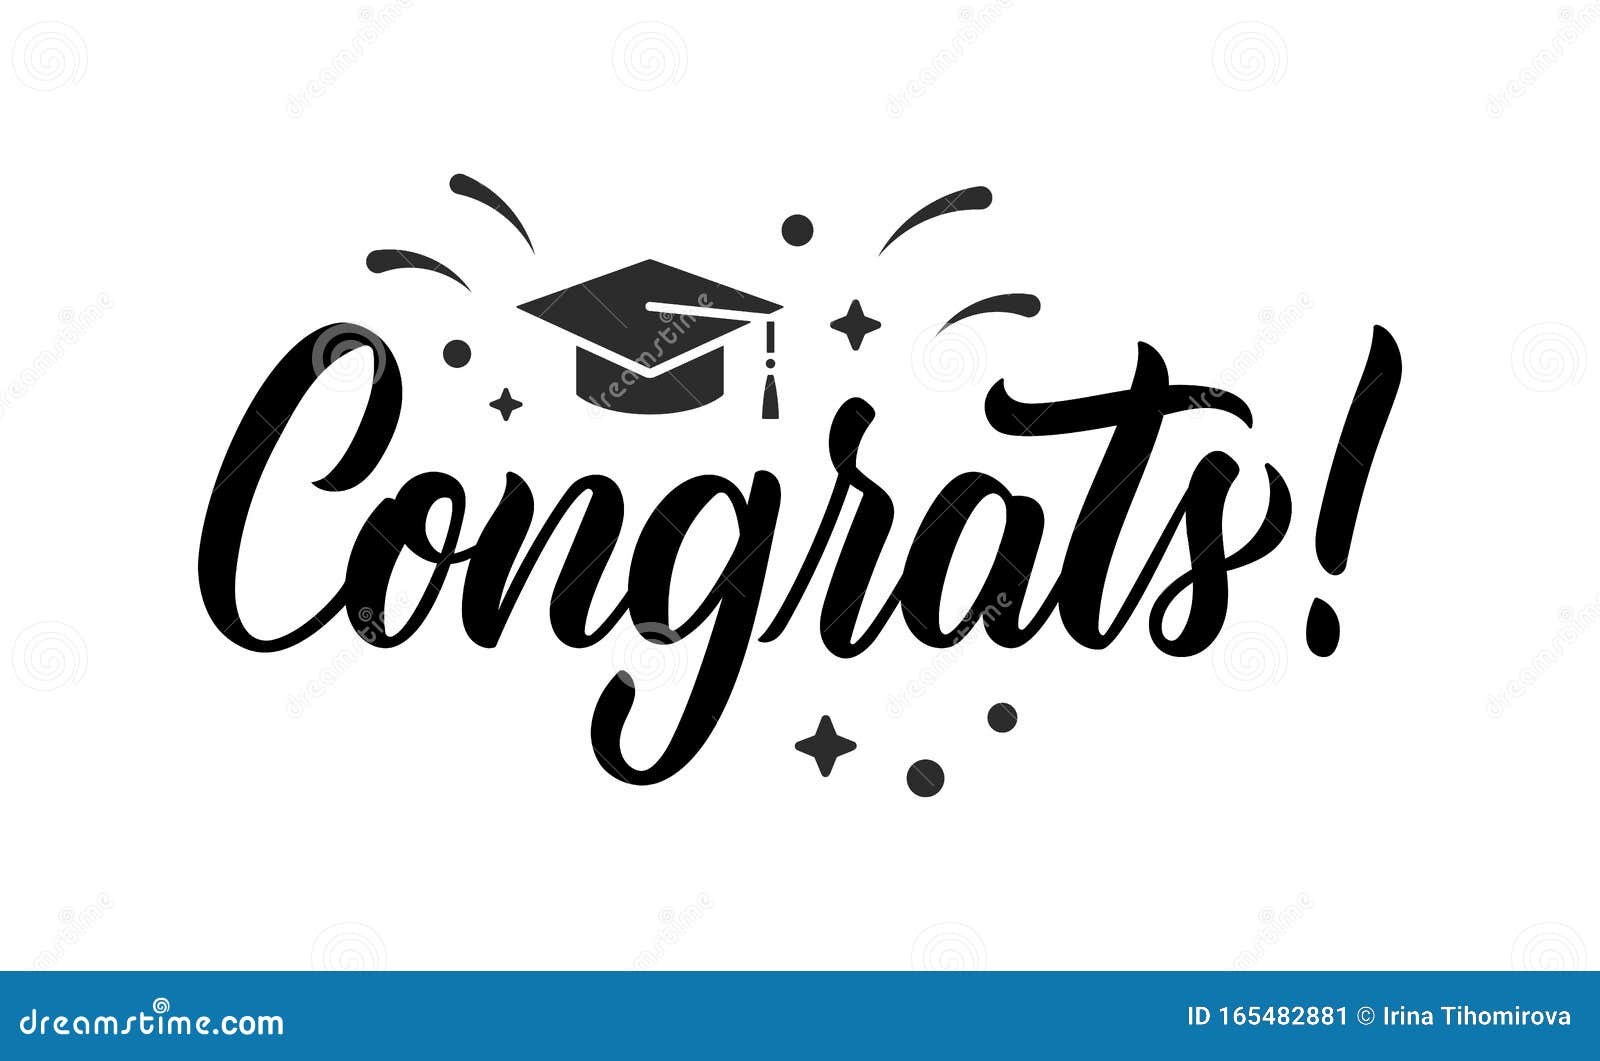 congrats. graduation congratulations at school, university or college. trendy calligraphy inscription in black ink with decorative